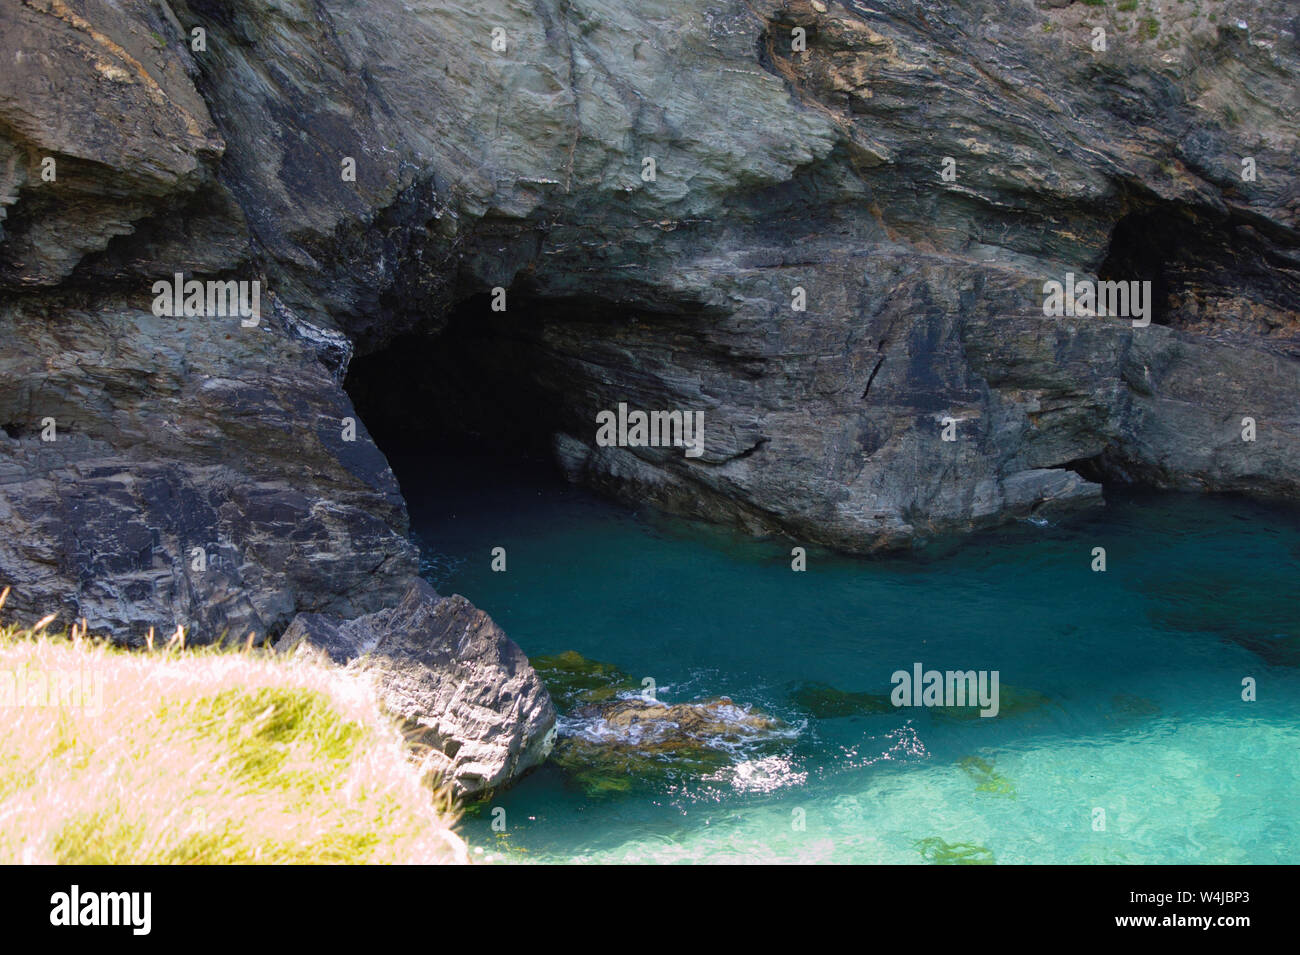 Merlin's cave à Tintagel, Cornwall, Royaume-Uni. Banque D'Images